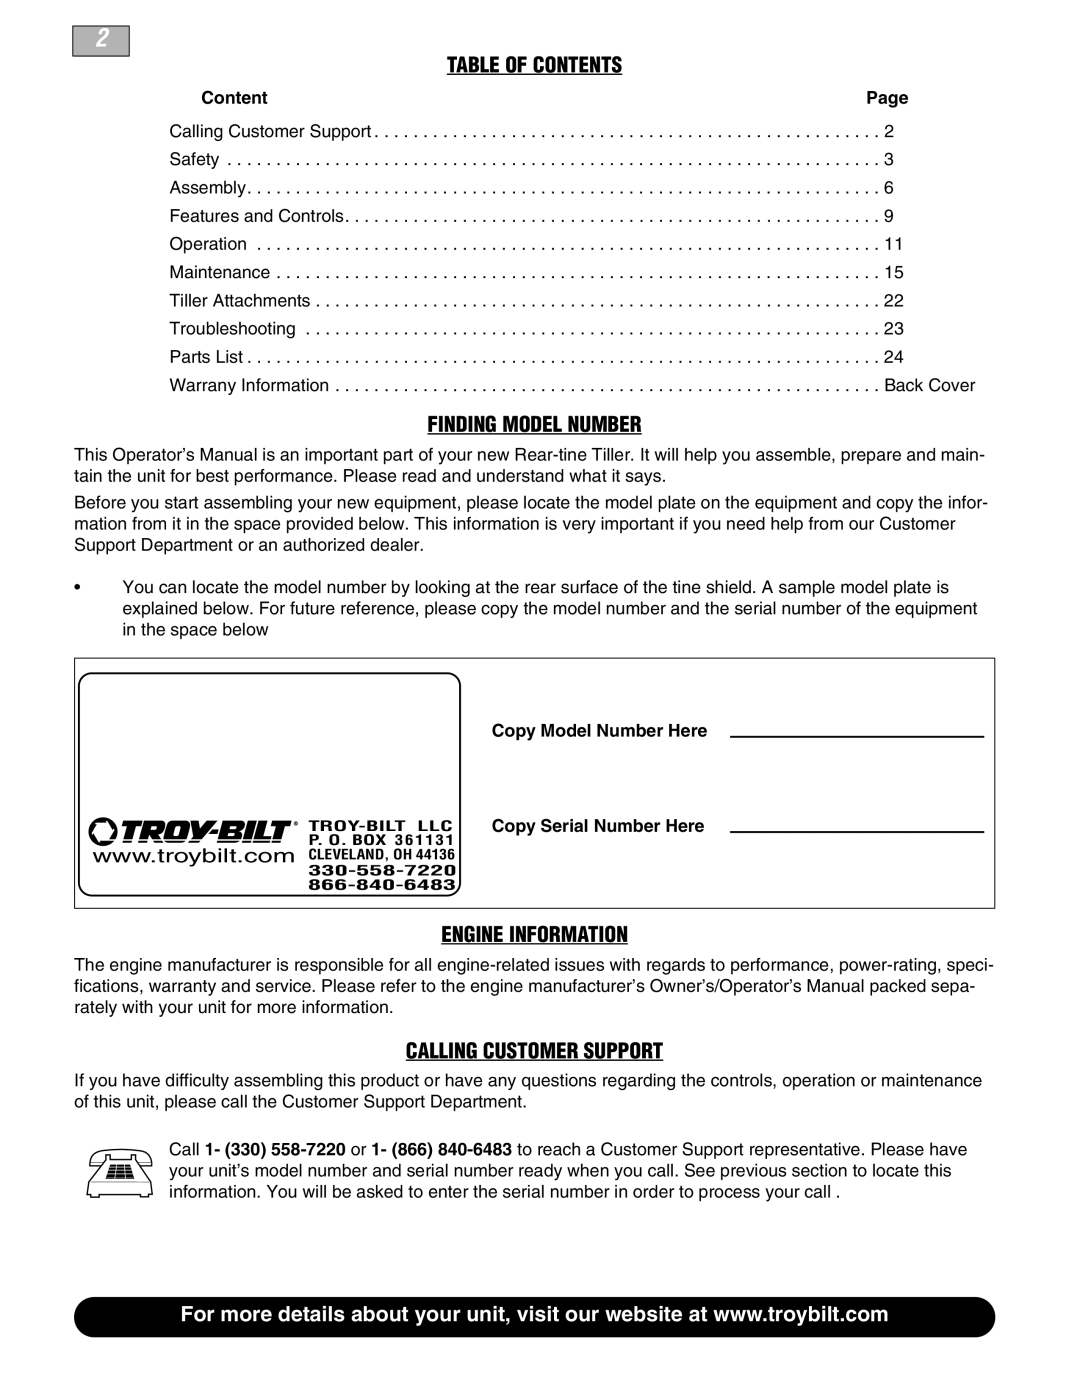 Troy-Bilt 665B manual Table Of Contents, Finding Model Number, Engine Information, Calling Customer Support 